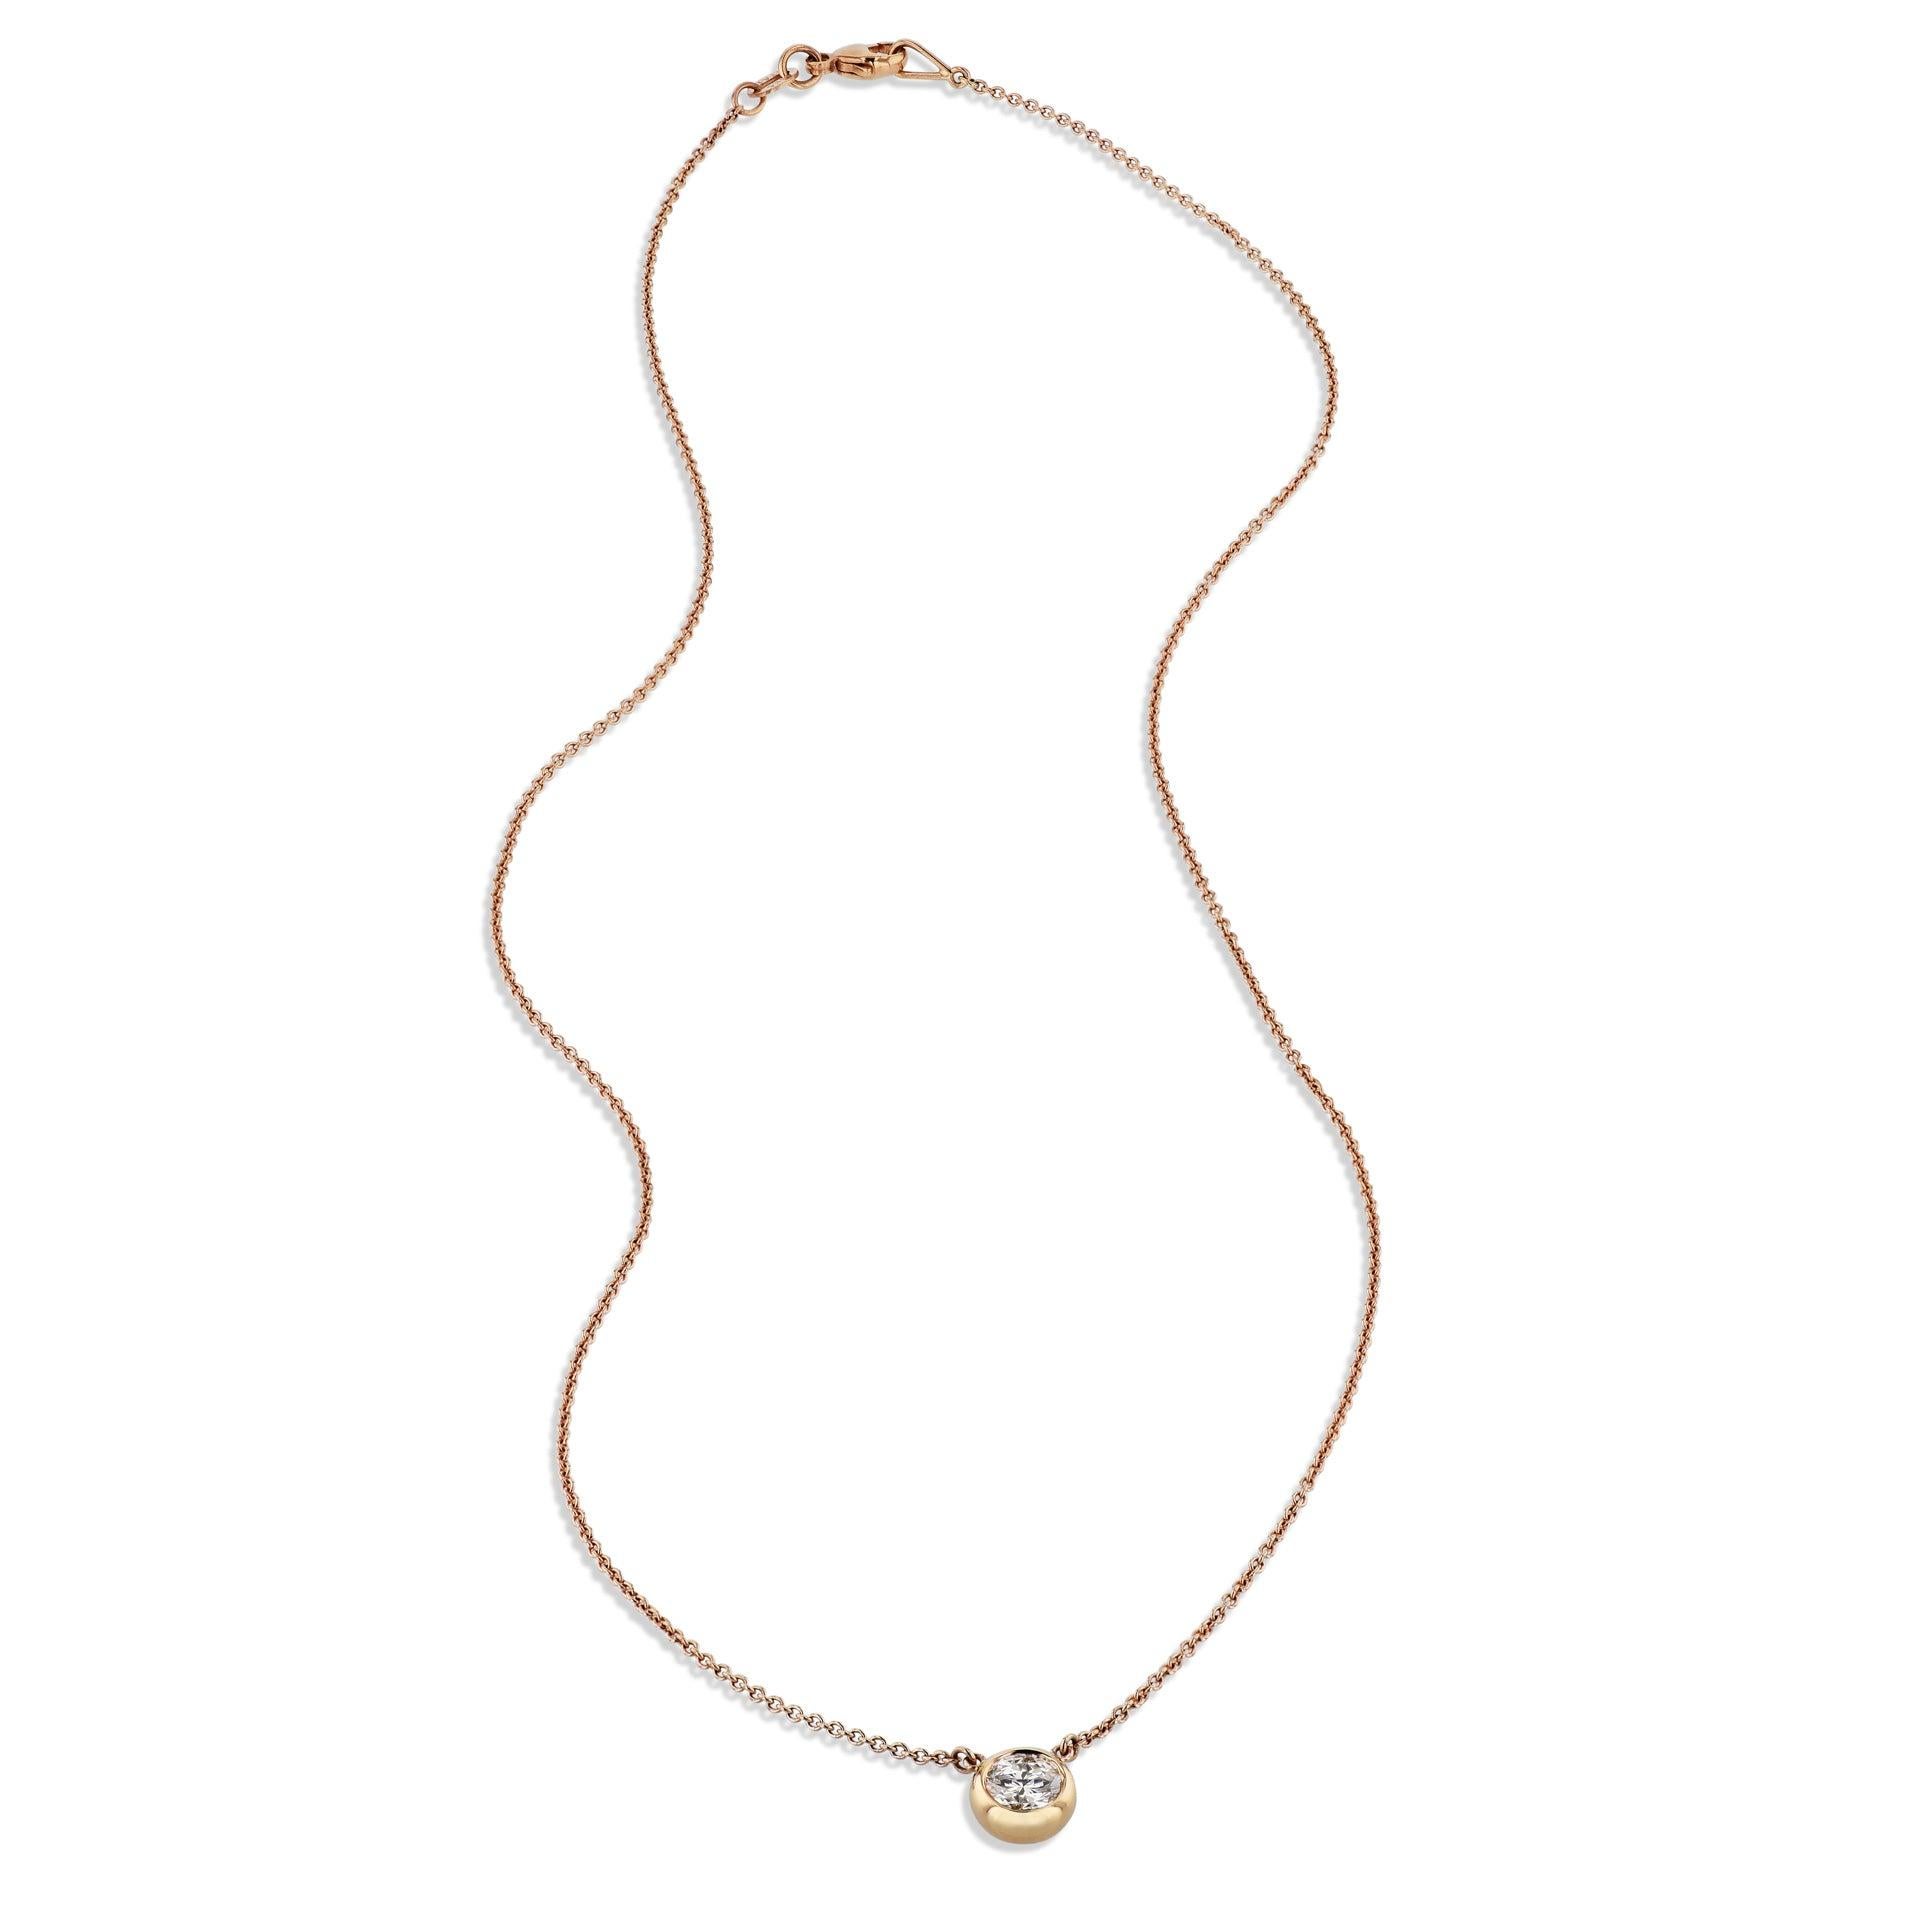 This dazzling Round Diamond Pendant Necklace is pure perfection! Crafted with 18kt. Rose Gold, it features a Bezel-Set Diamond, and a beautiful 18kt. Rose Gold Cable Link Chain, handmade by H&H Jewels. A true work of art!
Round Diamond Rose Gold